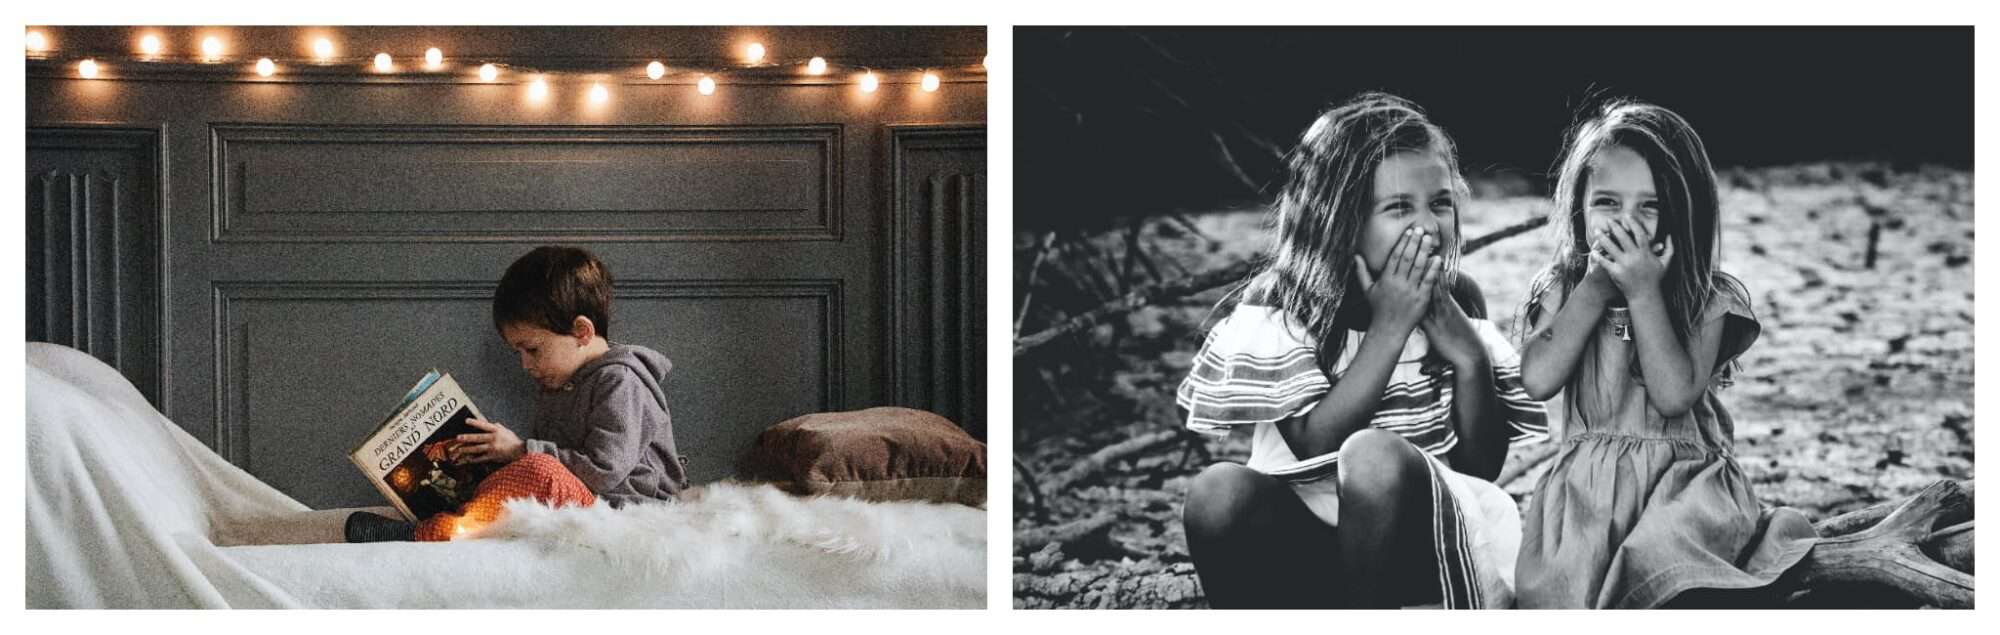 Left: A young French boy reads a book in his bedroom which has grey walls, a white bed and stringed fairy lights; right: a black and white photo of young girls with long brown hair giggling as their hands cover their faces. 